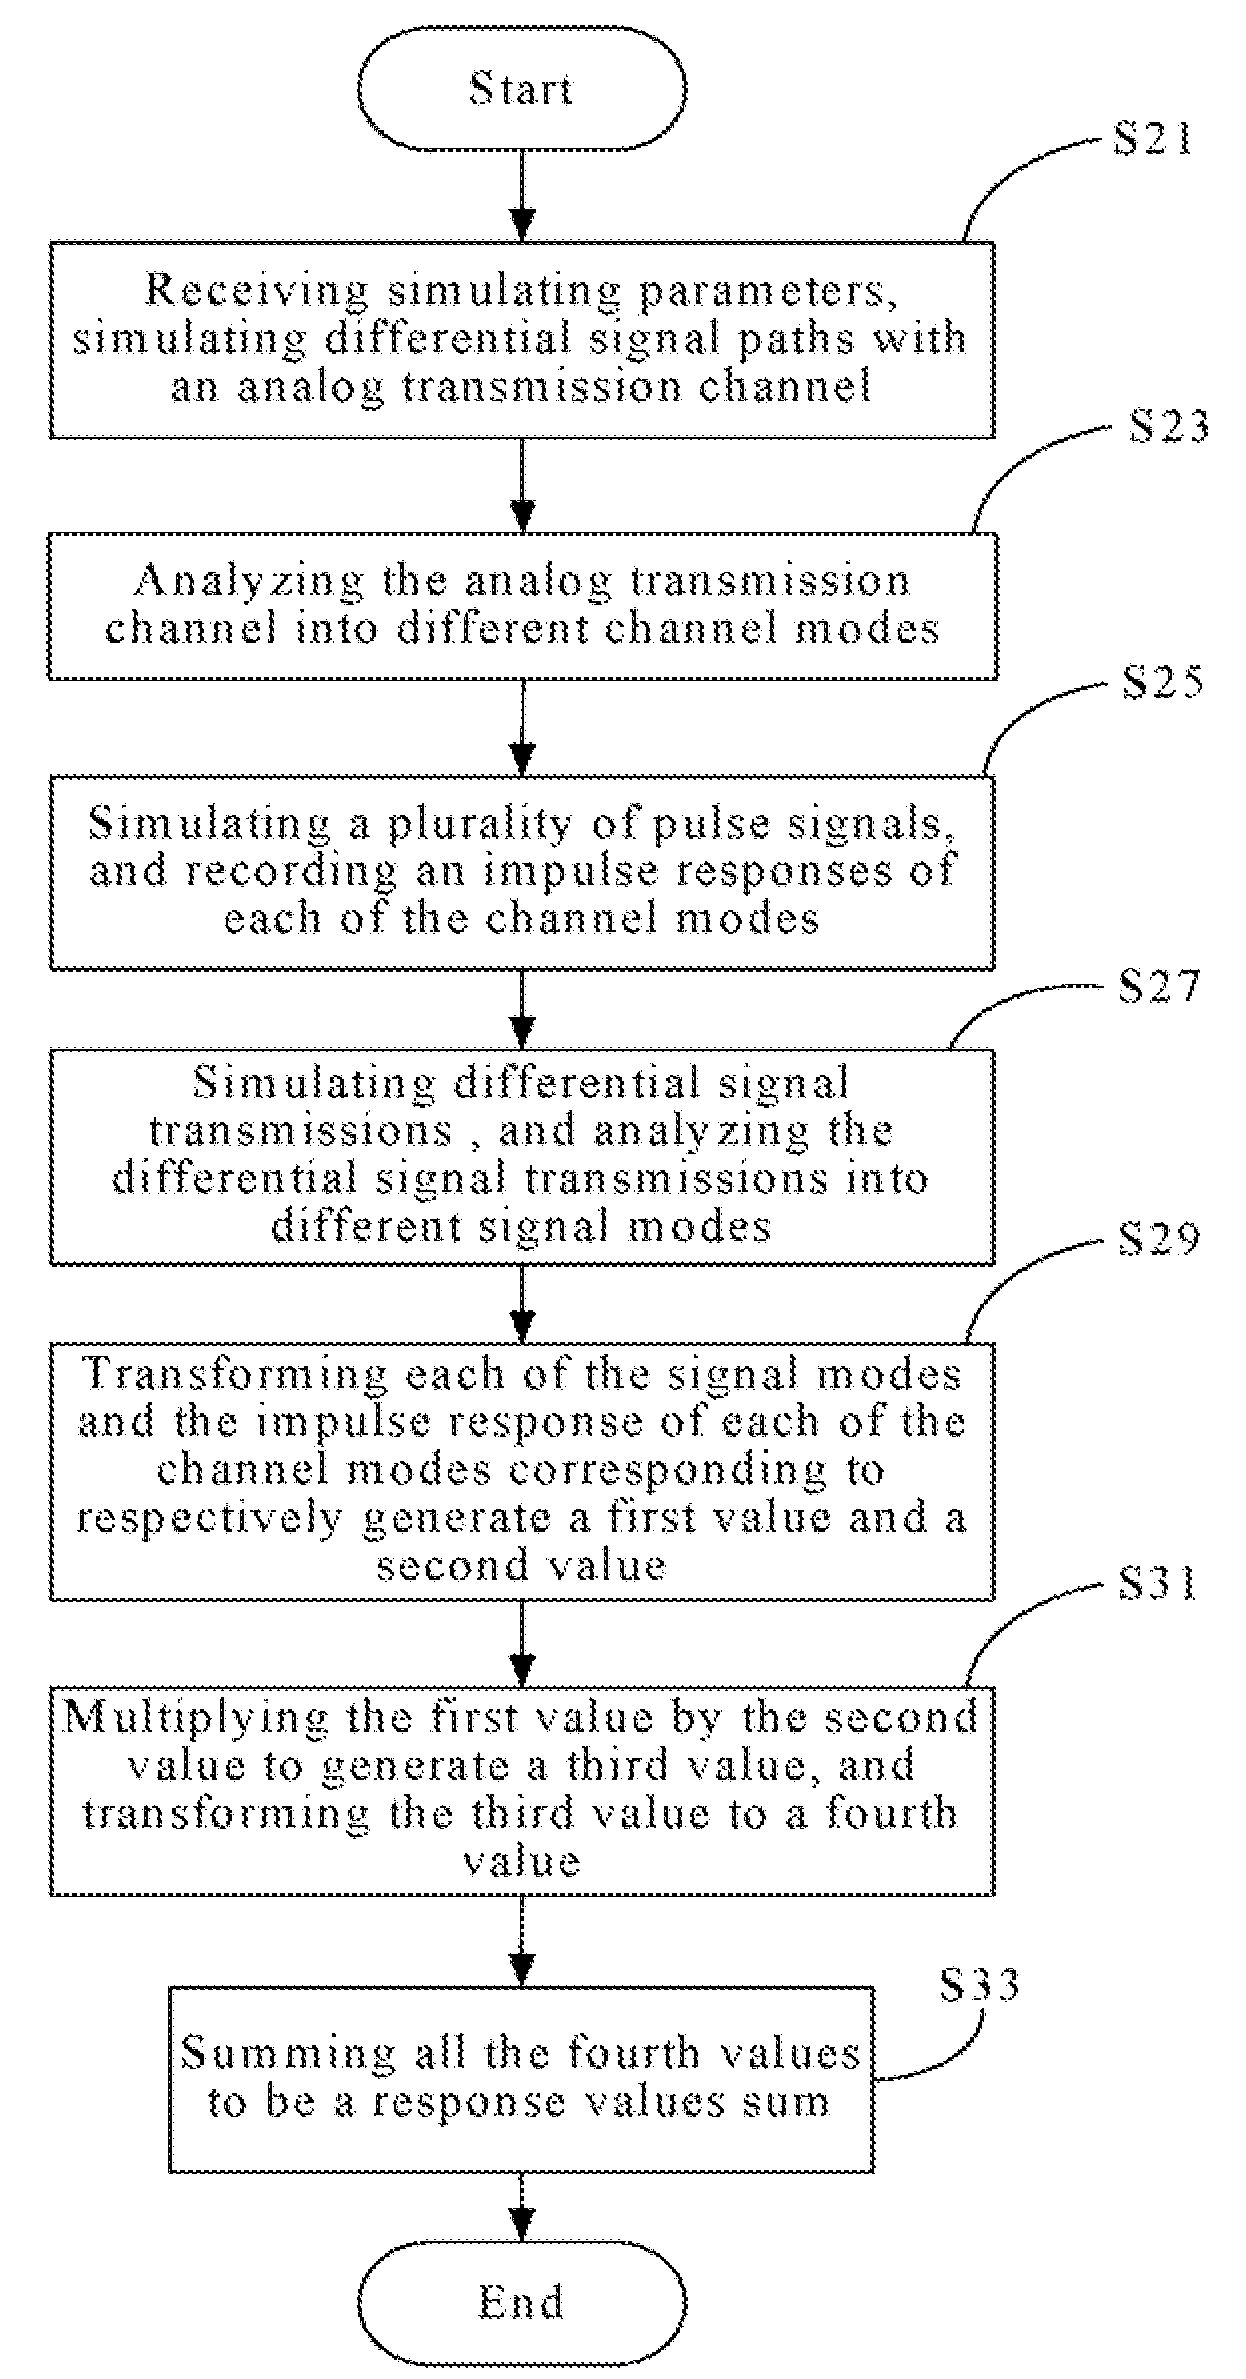 System and method for analyzing response values sum of differential signals